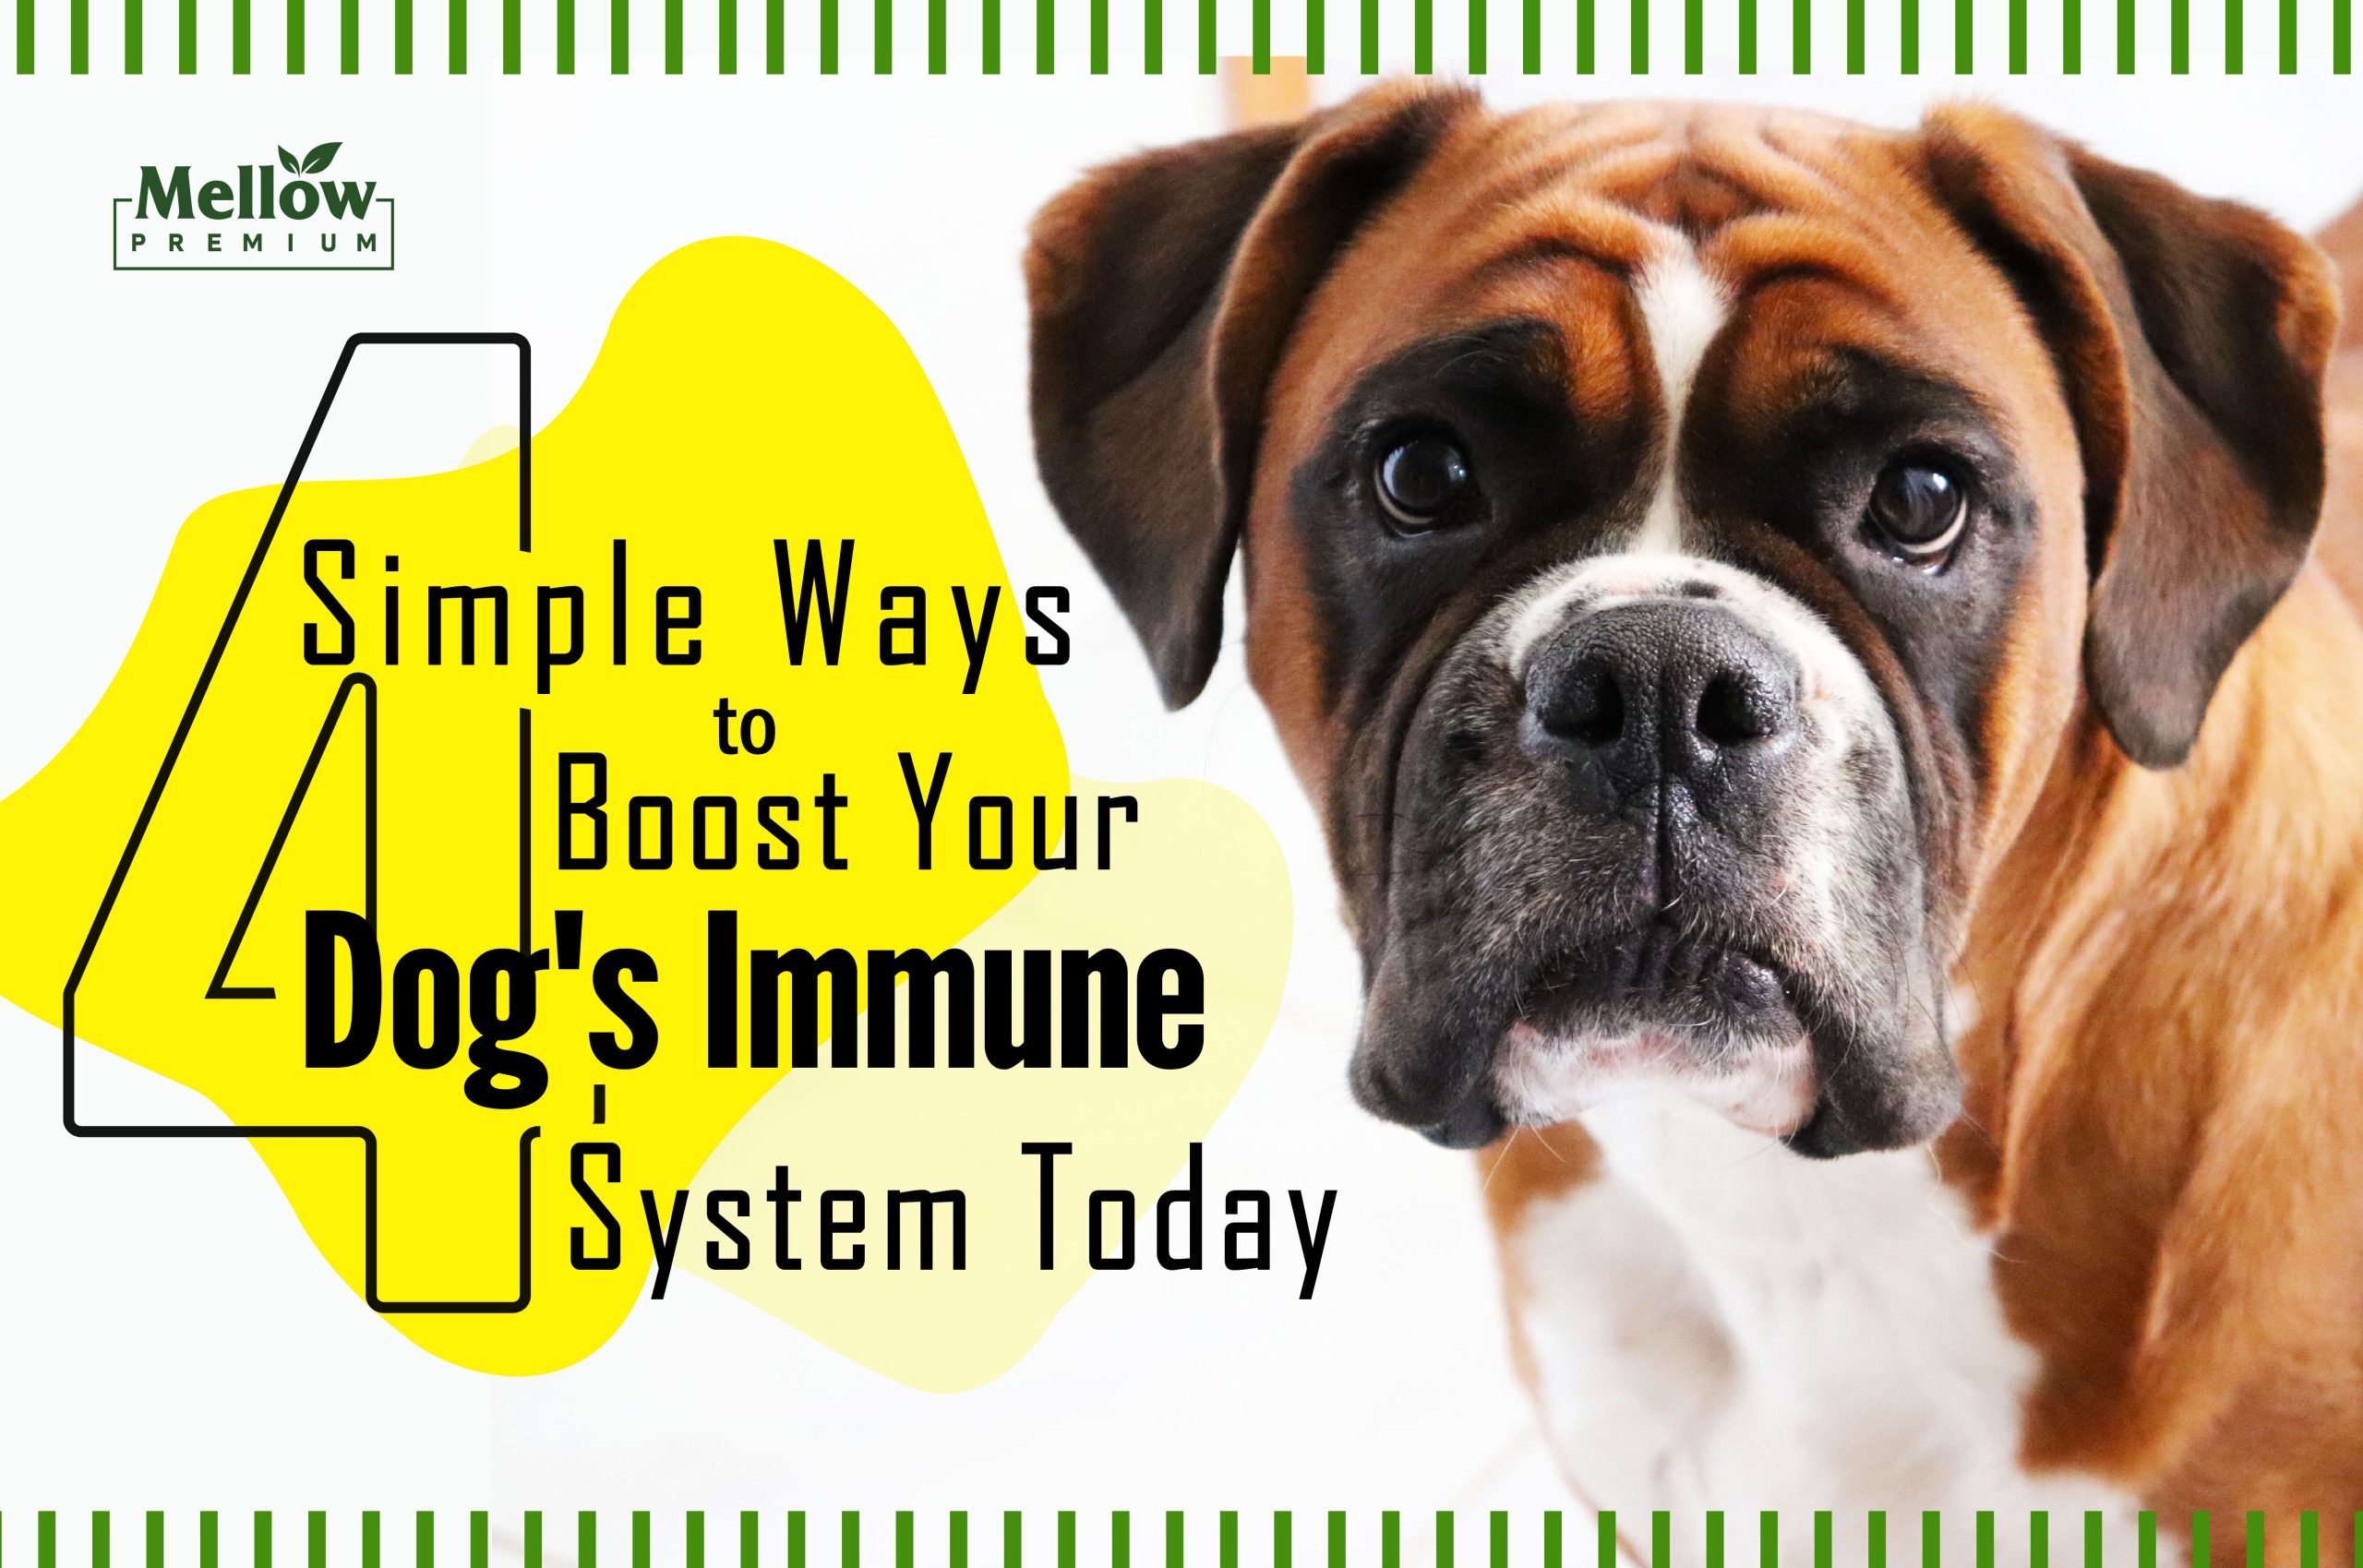 4 Simple Ways to Boost Your Dog's Immune System Today